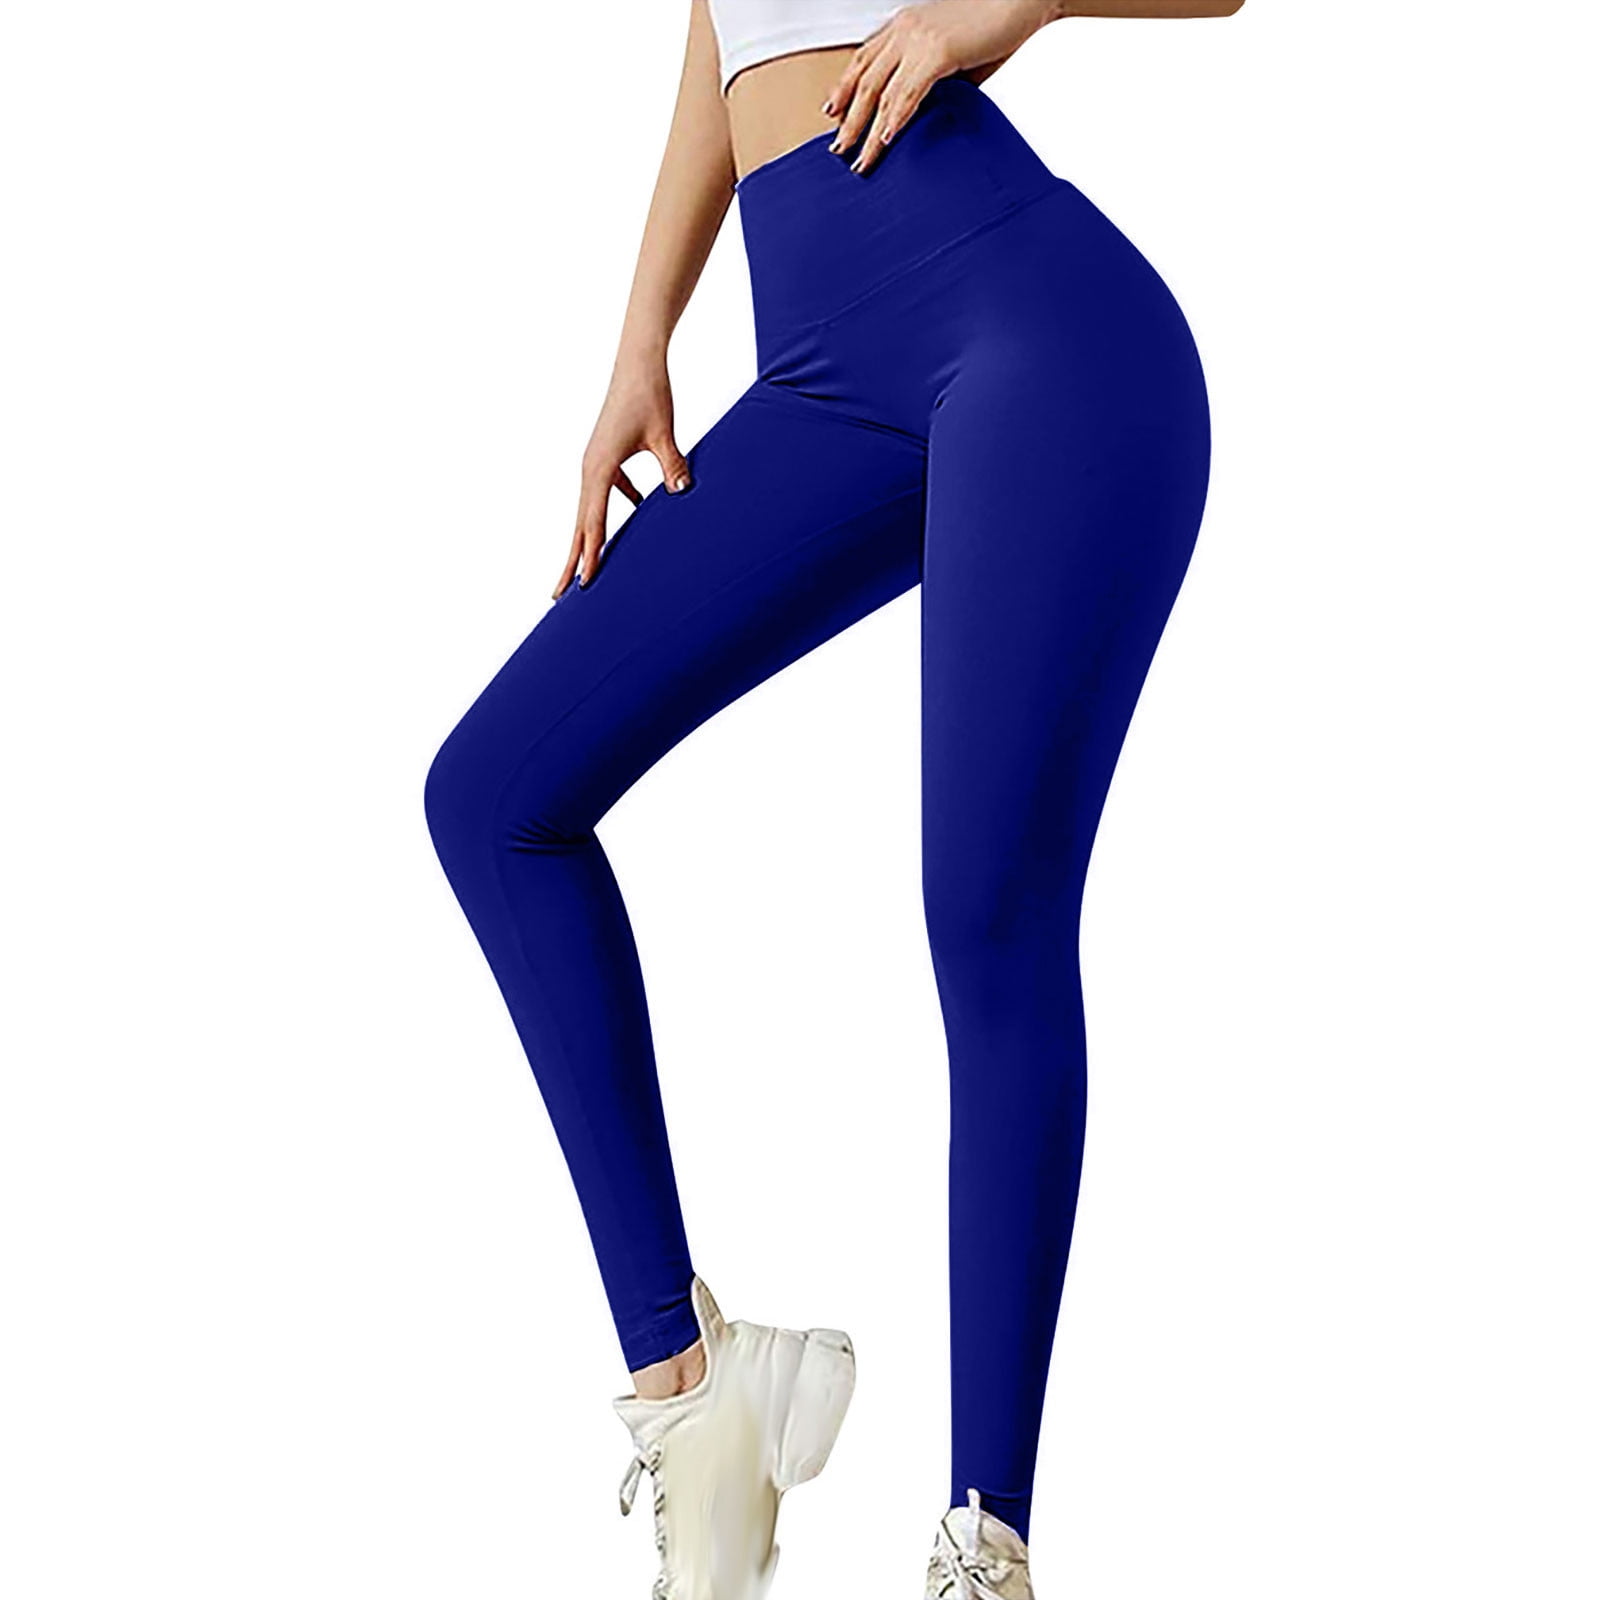 YYDGH Womens High Waisted Yoga Pants Bow-Knot Tie Workout Leggings Ruched  Butt Lifting Stretch Sport Running Tights Dark Blue XXL 